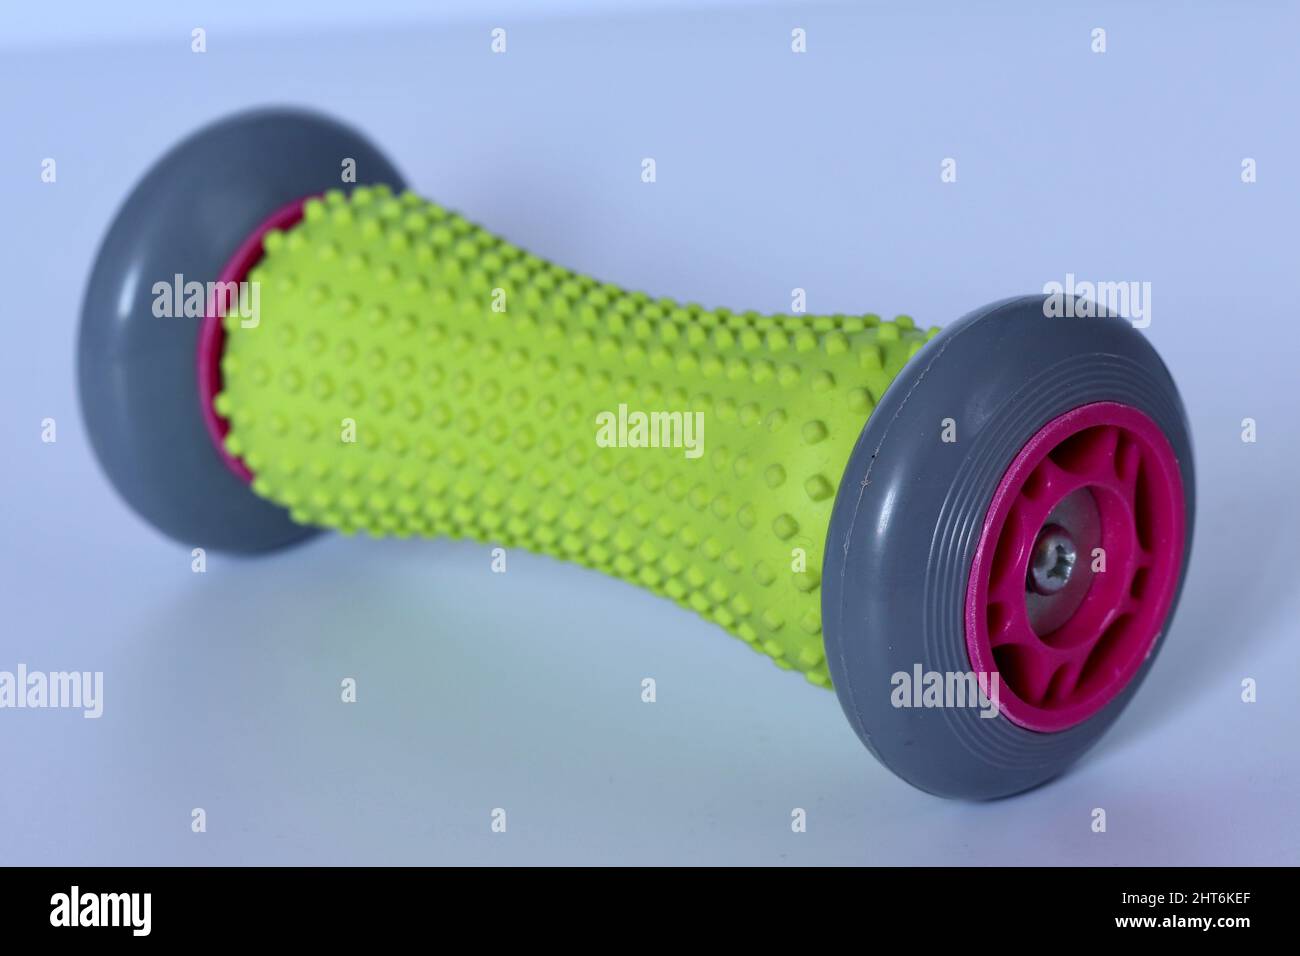 Home self help DIY physiotherapy equipment - foot massage roller Stock  Photo - Alamy